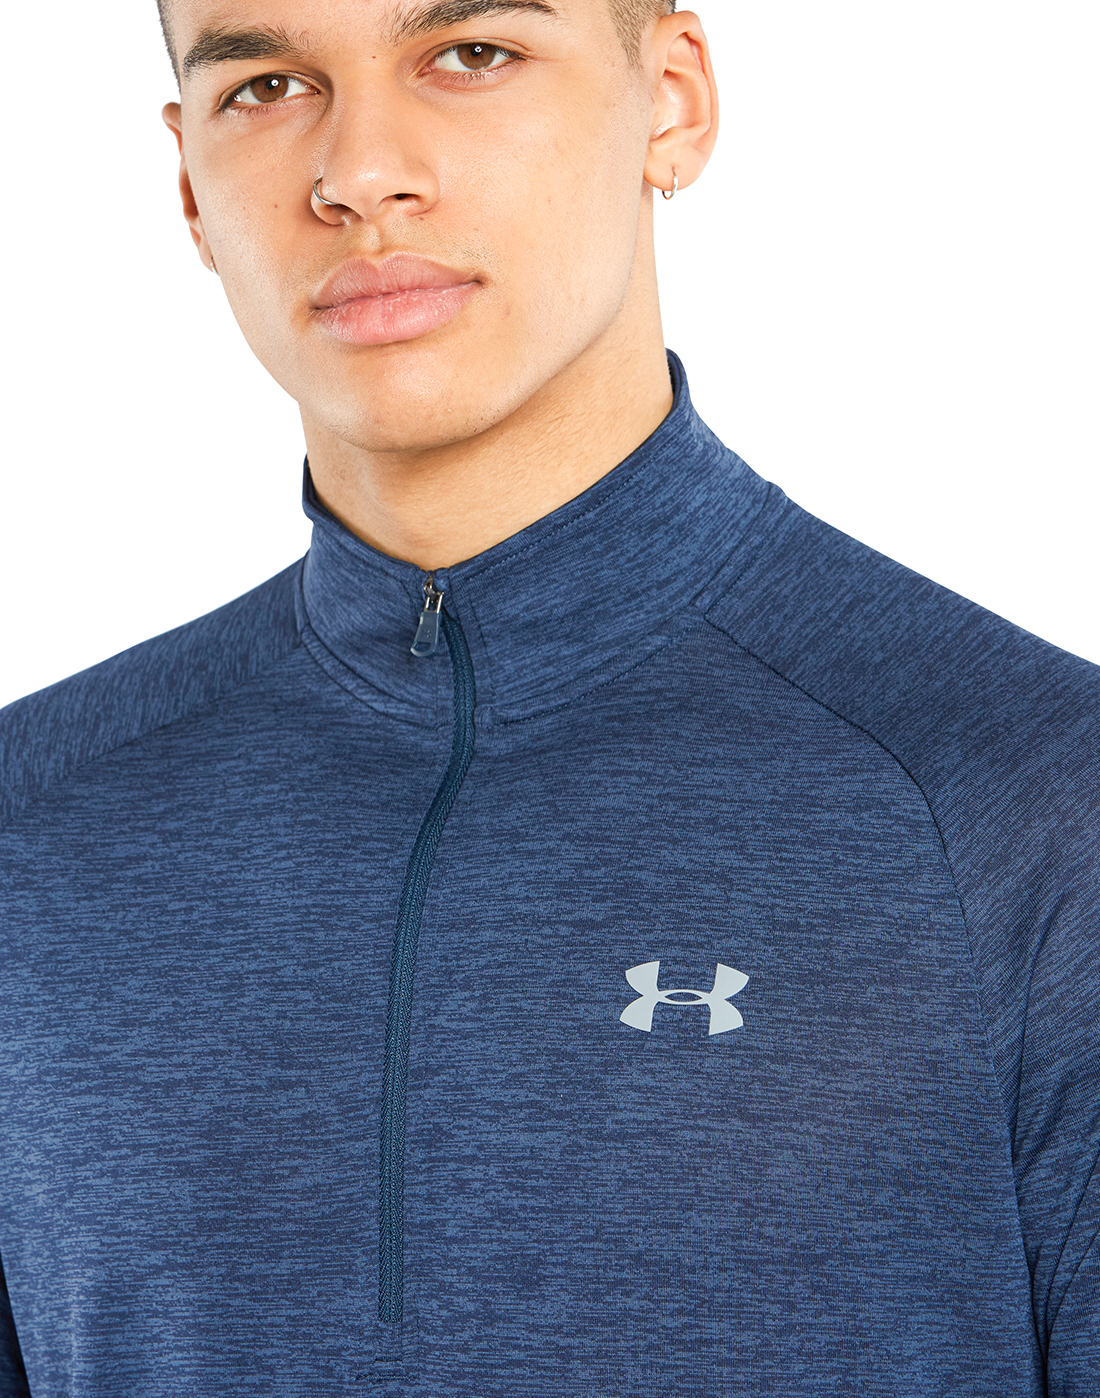 Under Armour Mens Tech 2.0 Half Zip Top - Navy | Life Style Sports IE